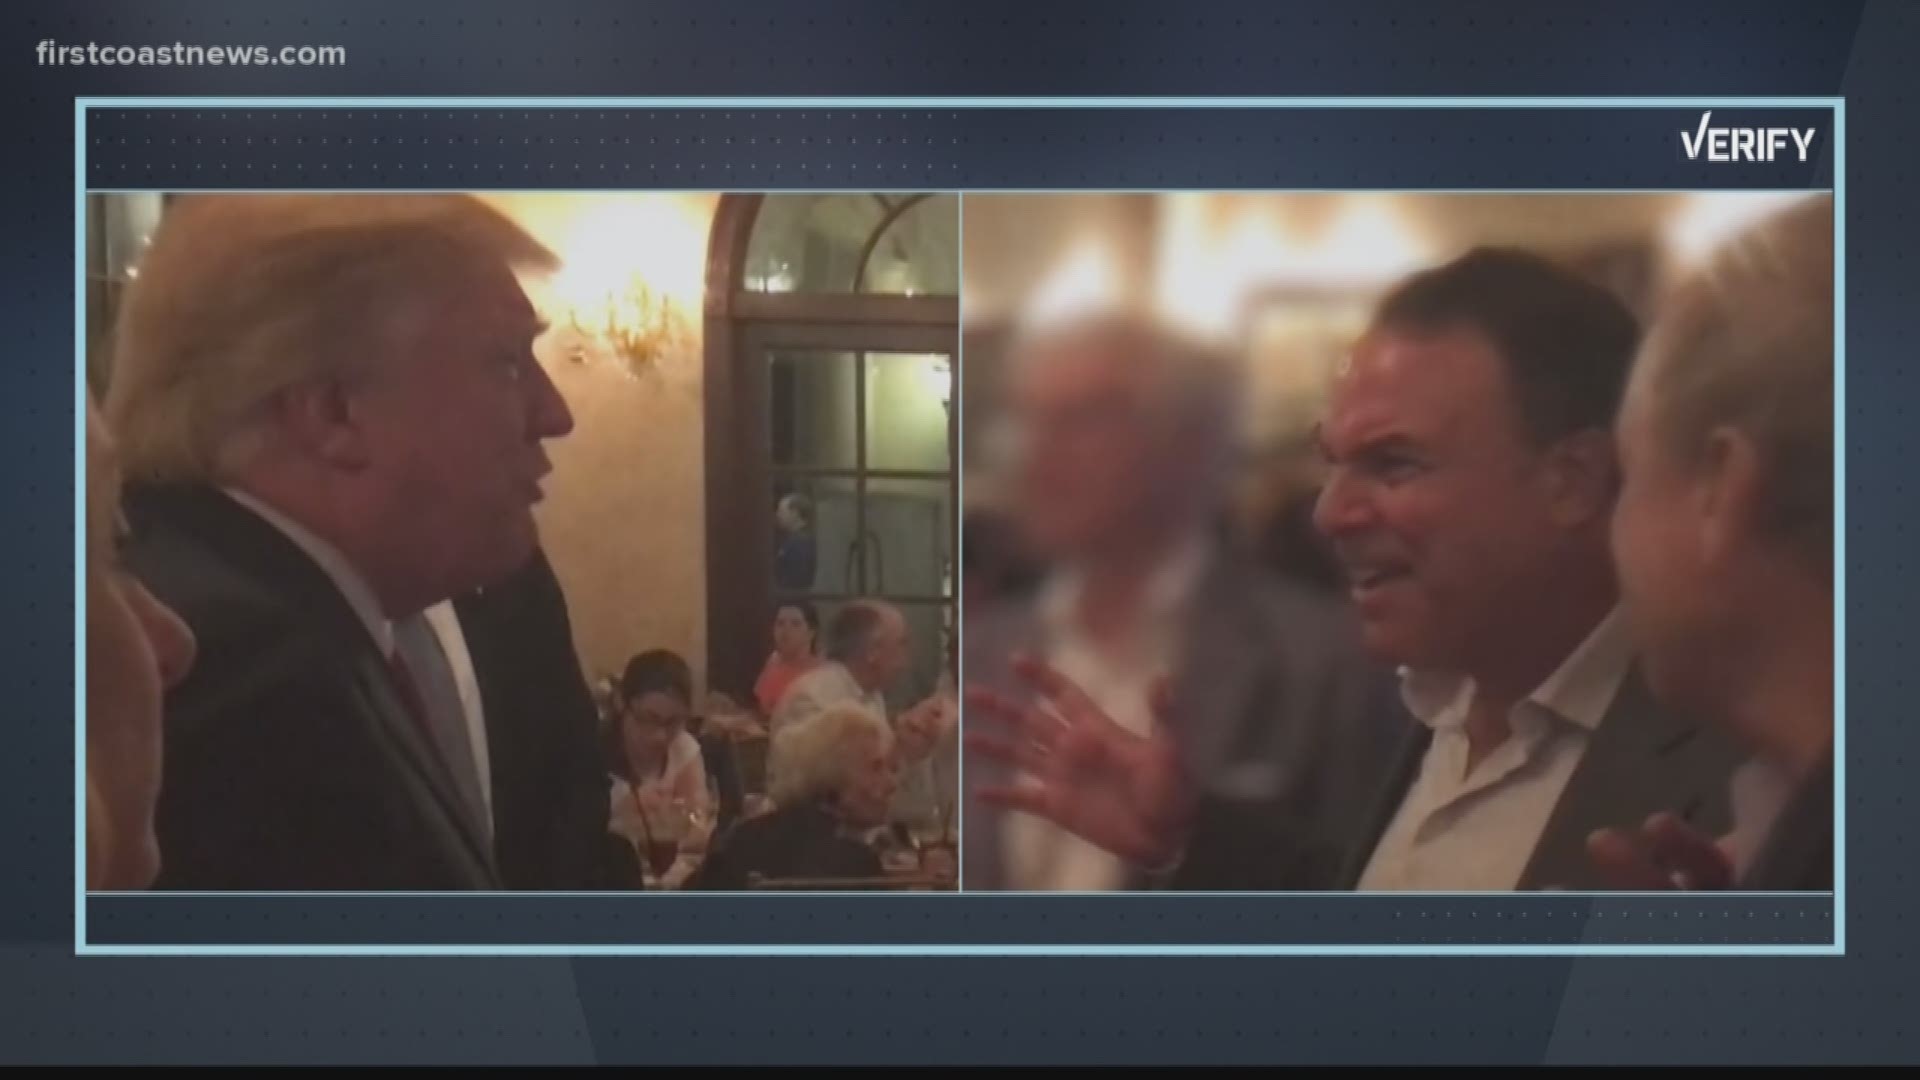 A Democrat running to be Florida's next governor said he is the only candidate in America to stand up to President Trump in his own dining room. But, is that true?